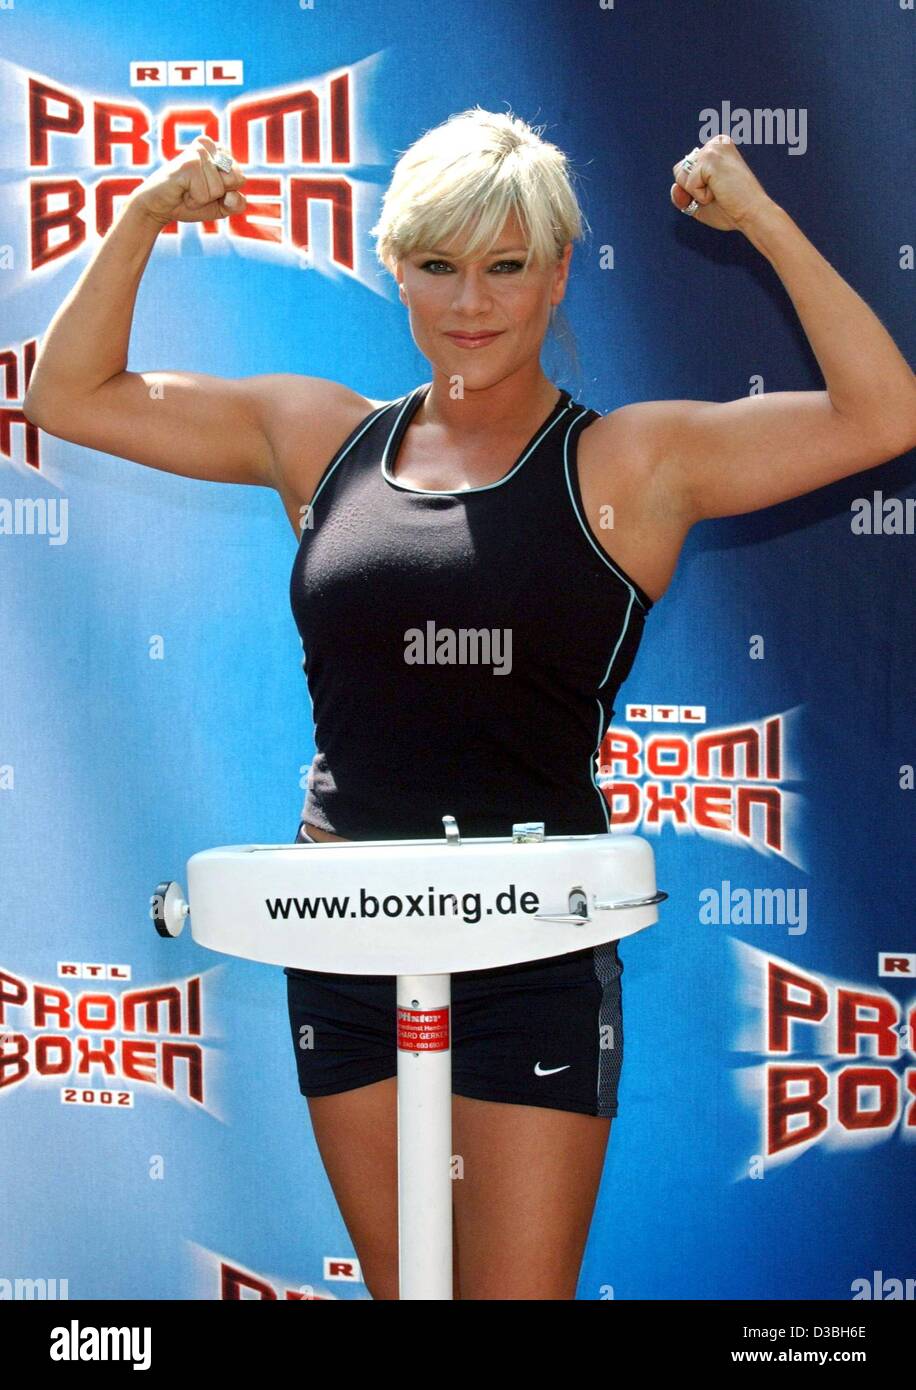 (dpa) - British pop singer Samantha Fox flexes her muscles while she is being weighed in Cologne, Germany, 16 May 2003. The two celebrities will fight each other in the boxing ring which will be televised on RTL on 17 May. Five more celebrities will also participate in the boxing contest and just li Stock Photo